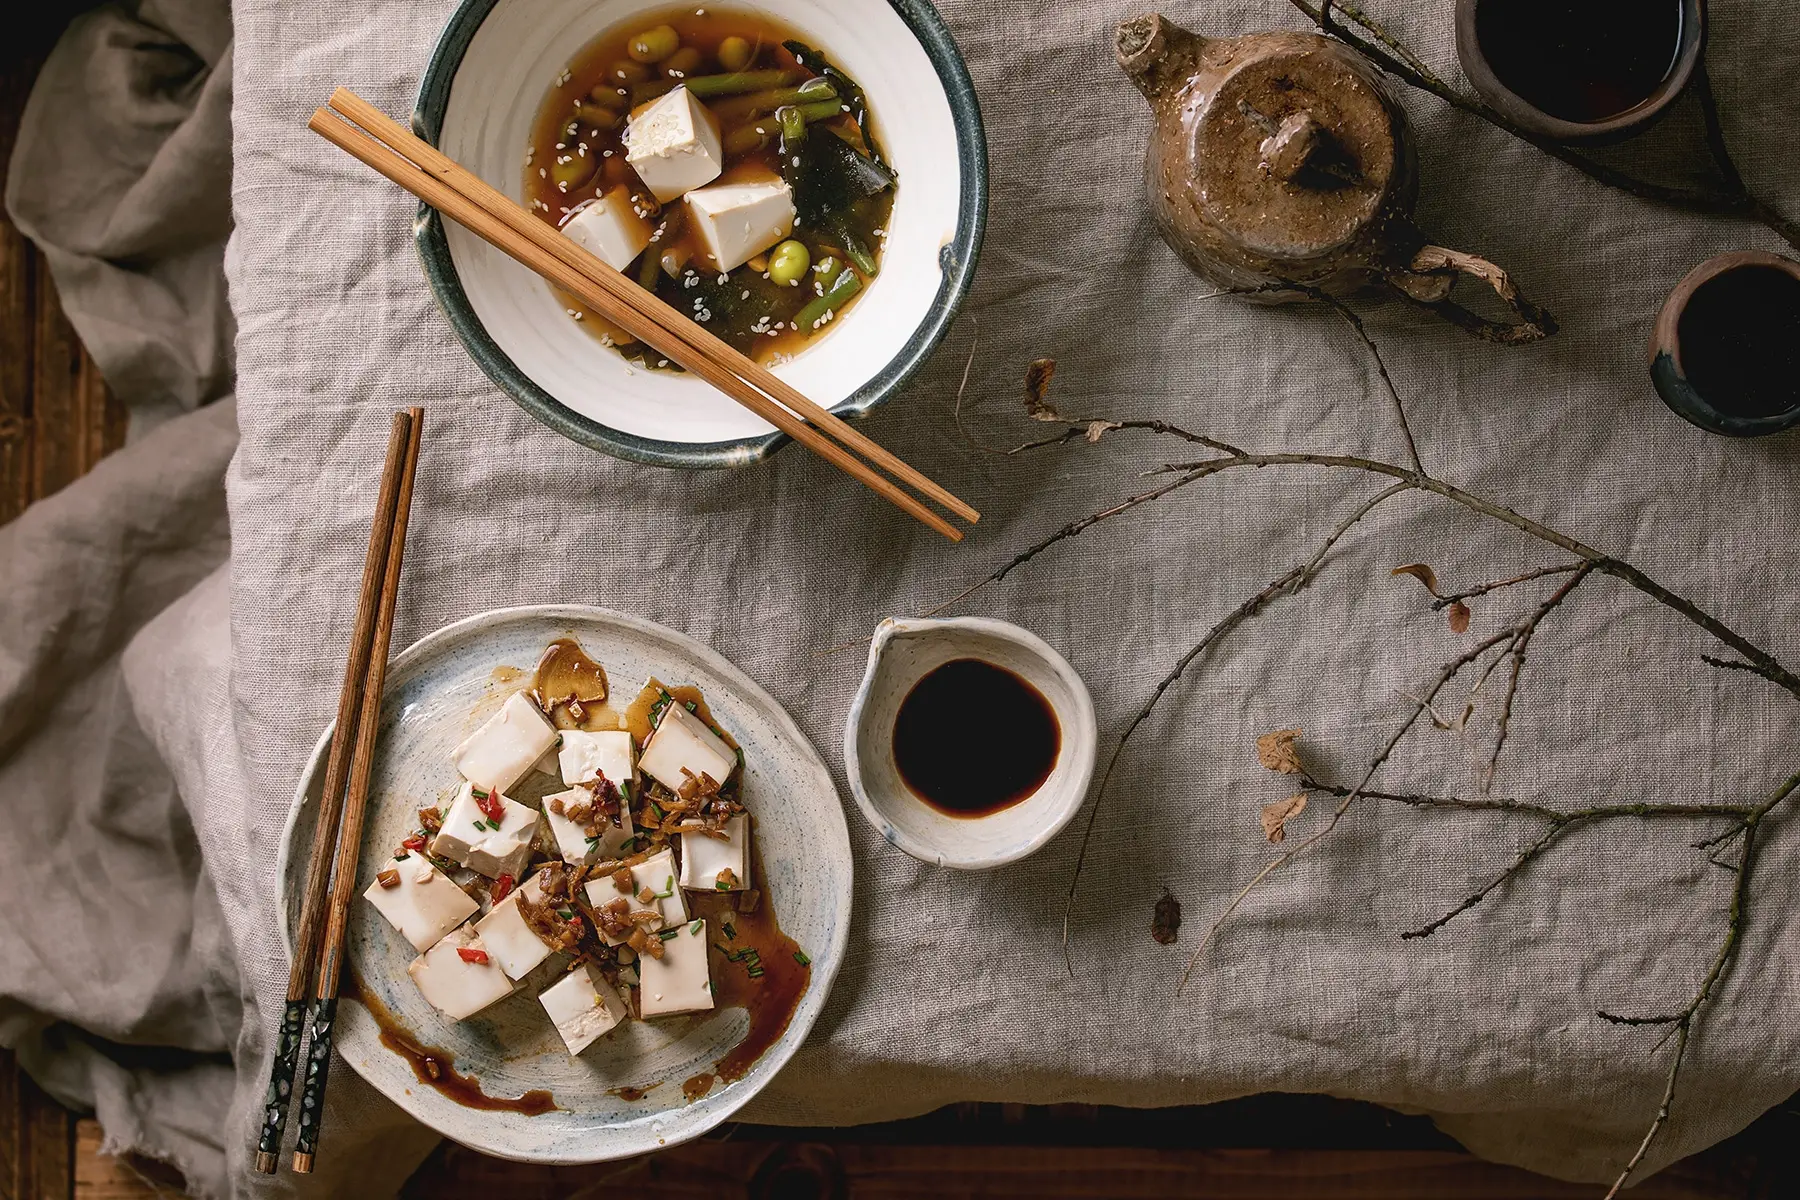 Two tofu dishes and a portion of soy sauce